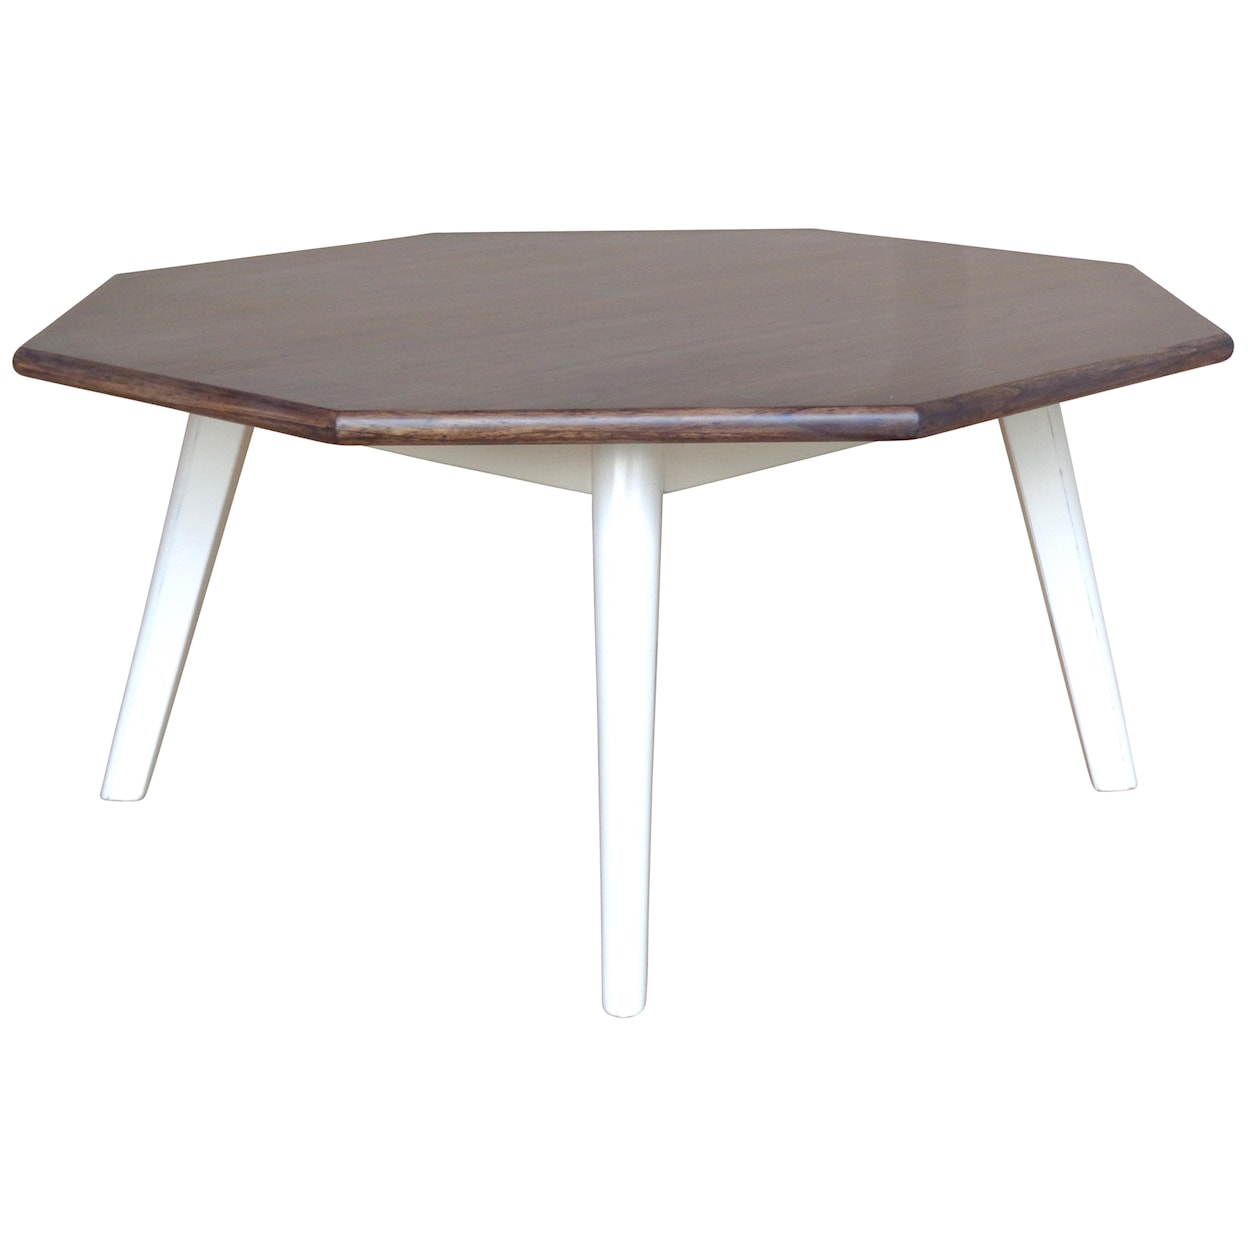 Trade Winds Furniture Occasional Table Groups Nantucket Cocktail Table